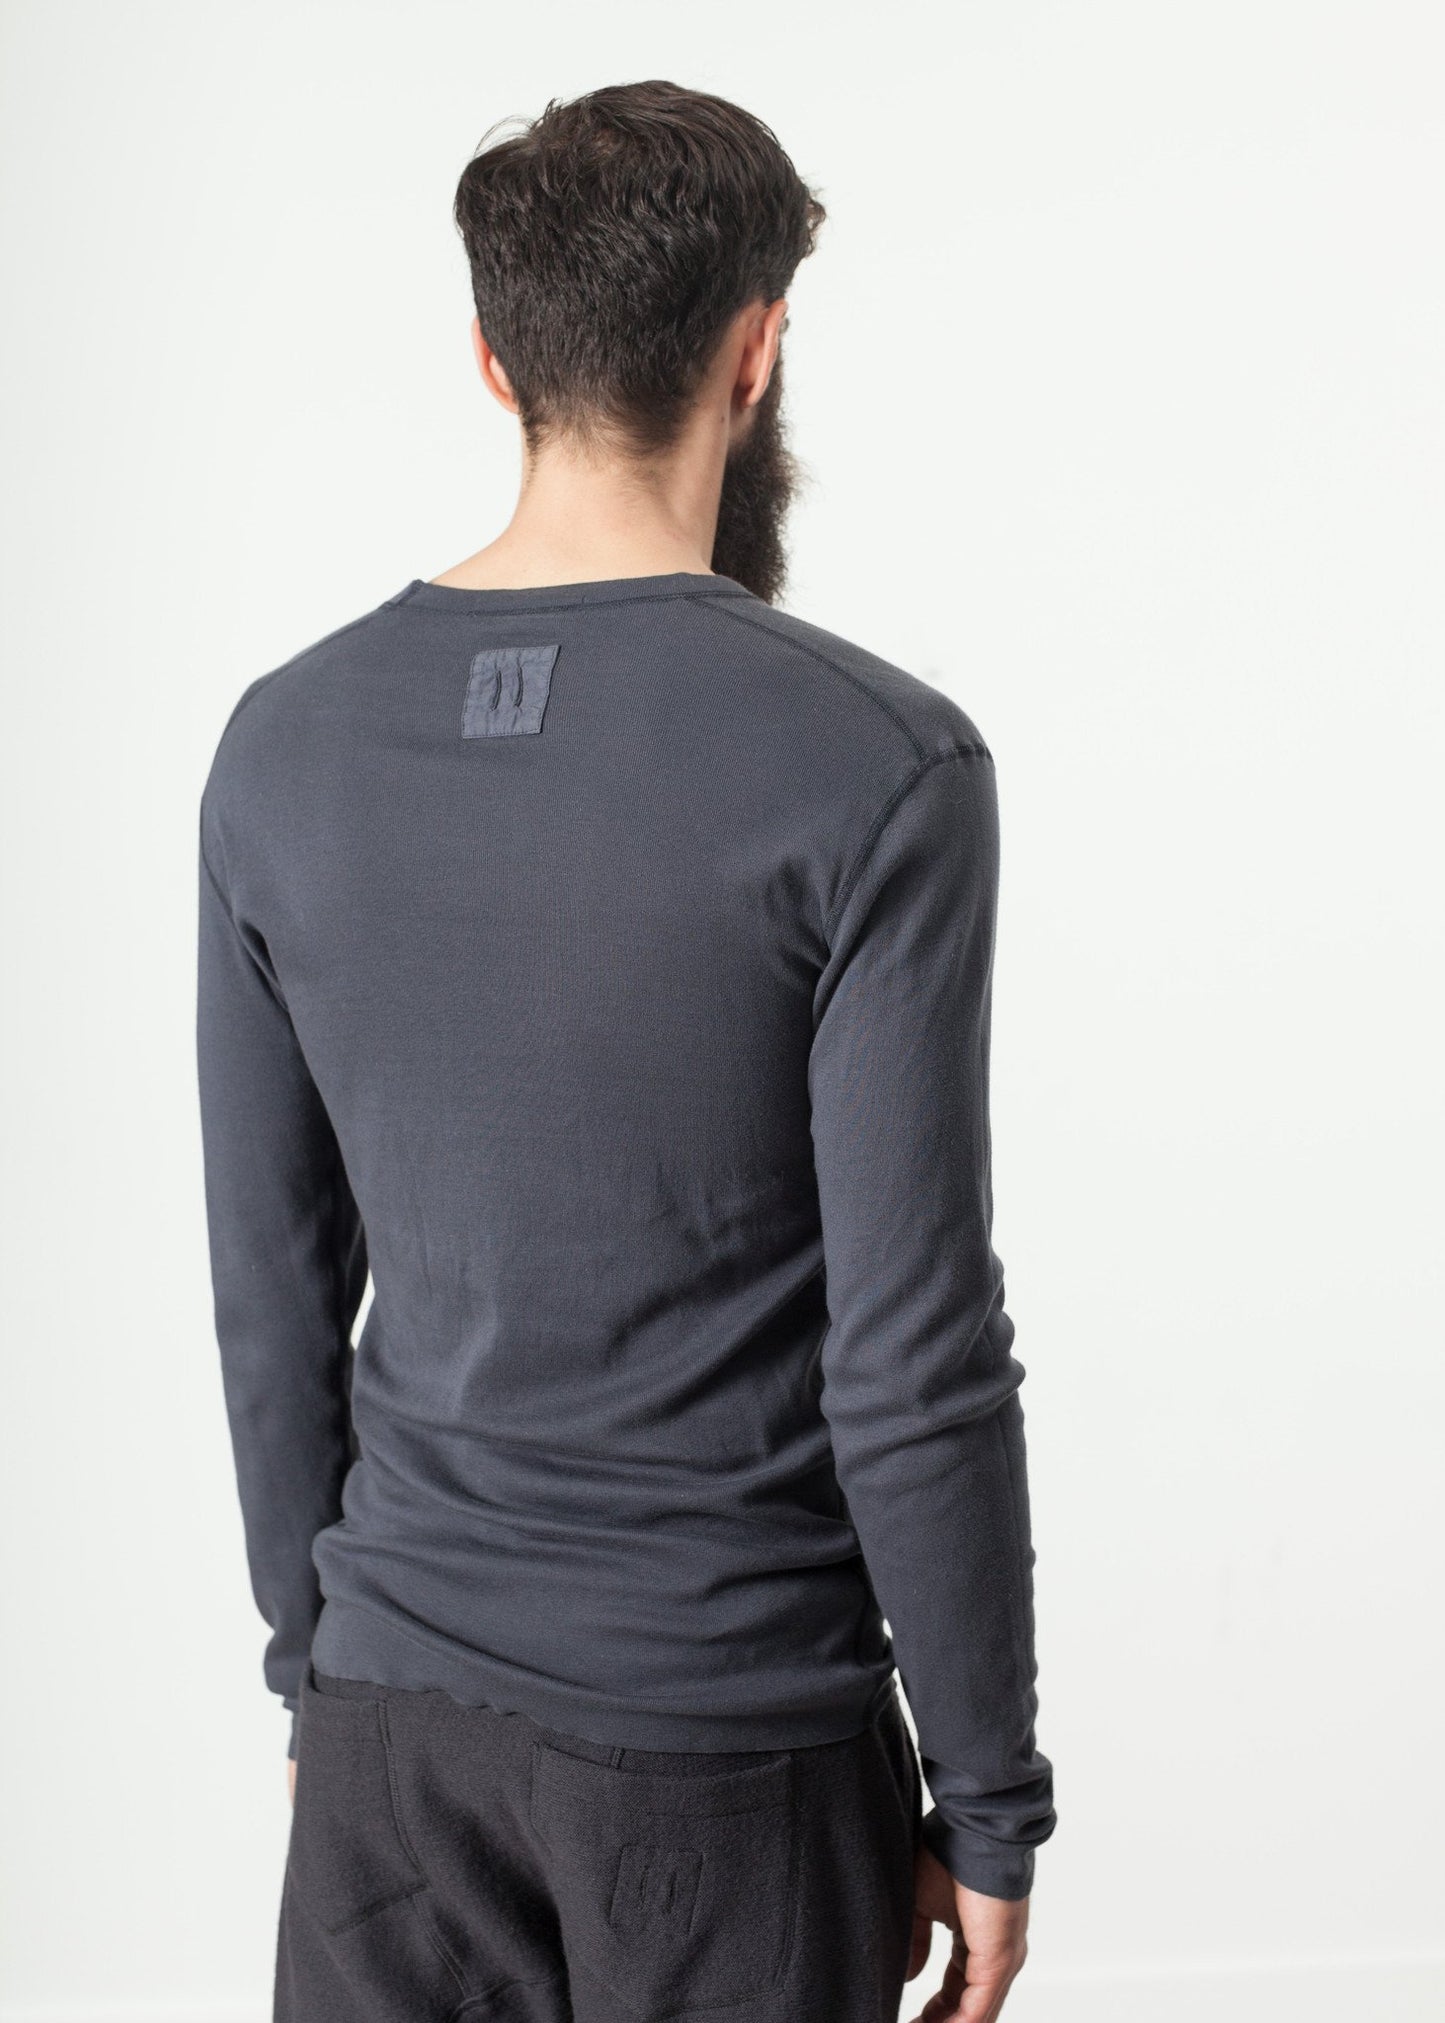 Secon Shale Shirt in Slate